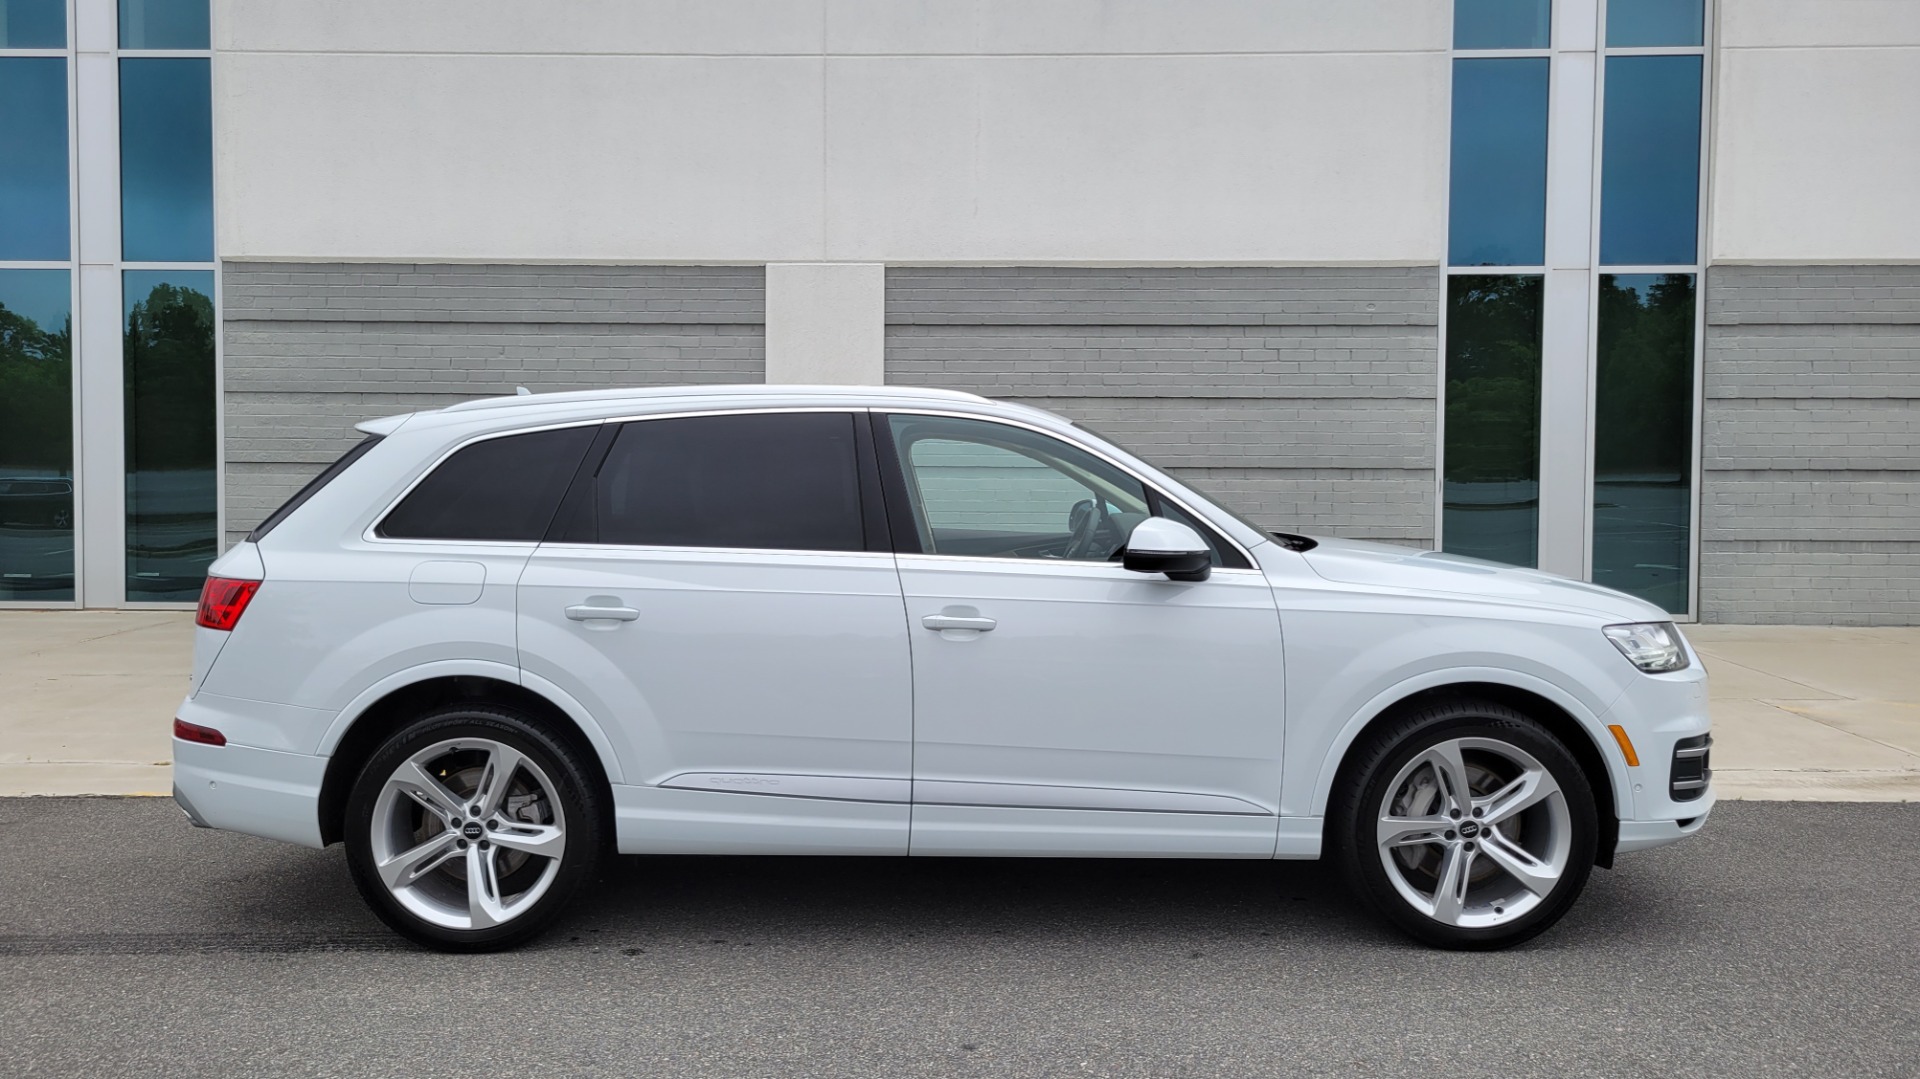 Used 2019 Audi Q7 PRESTIGE / CONV PKG / BOSE / HUD / CLD WTHR / TOWING / REARVIEW for sale $51,995 at Formula Imports in Charlotte NC 28227 10